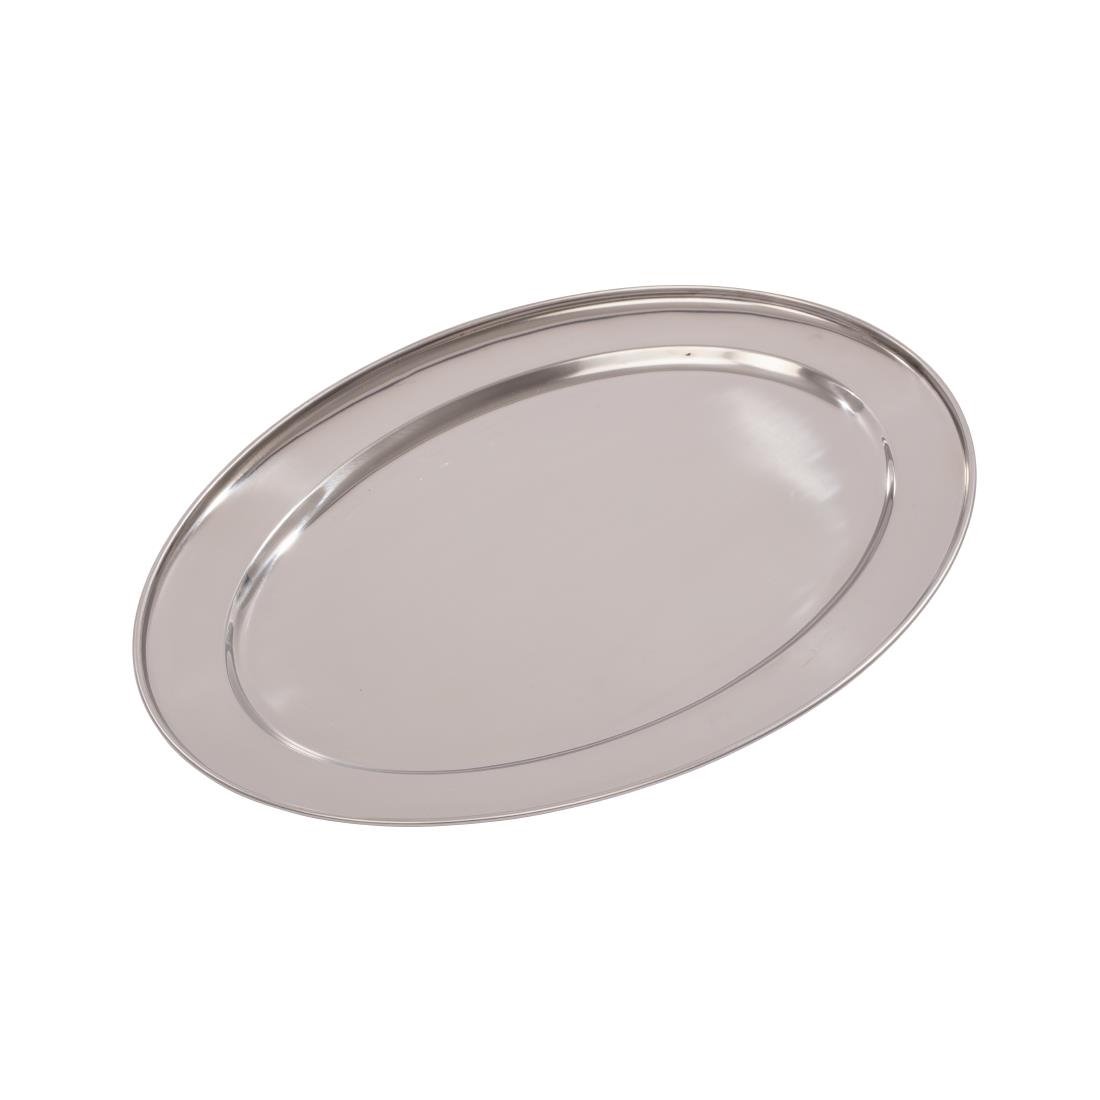 60cm Stainless Steel oval platter / serving tray